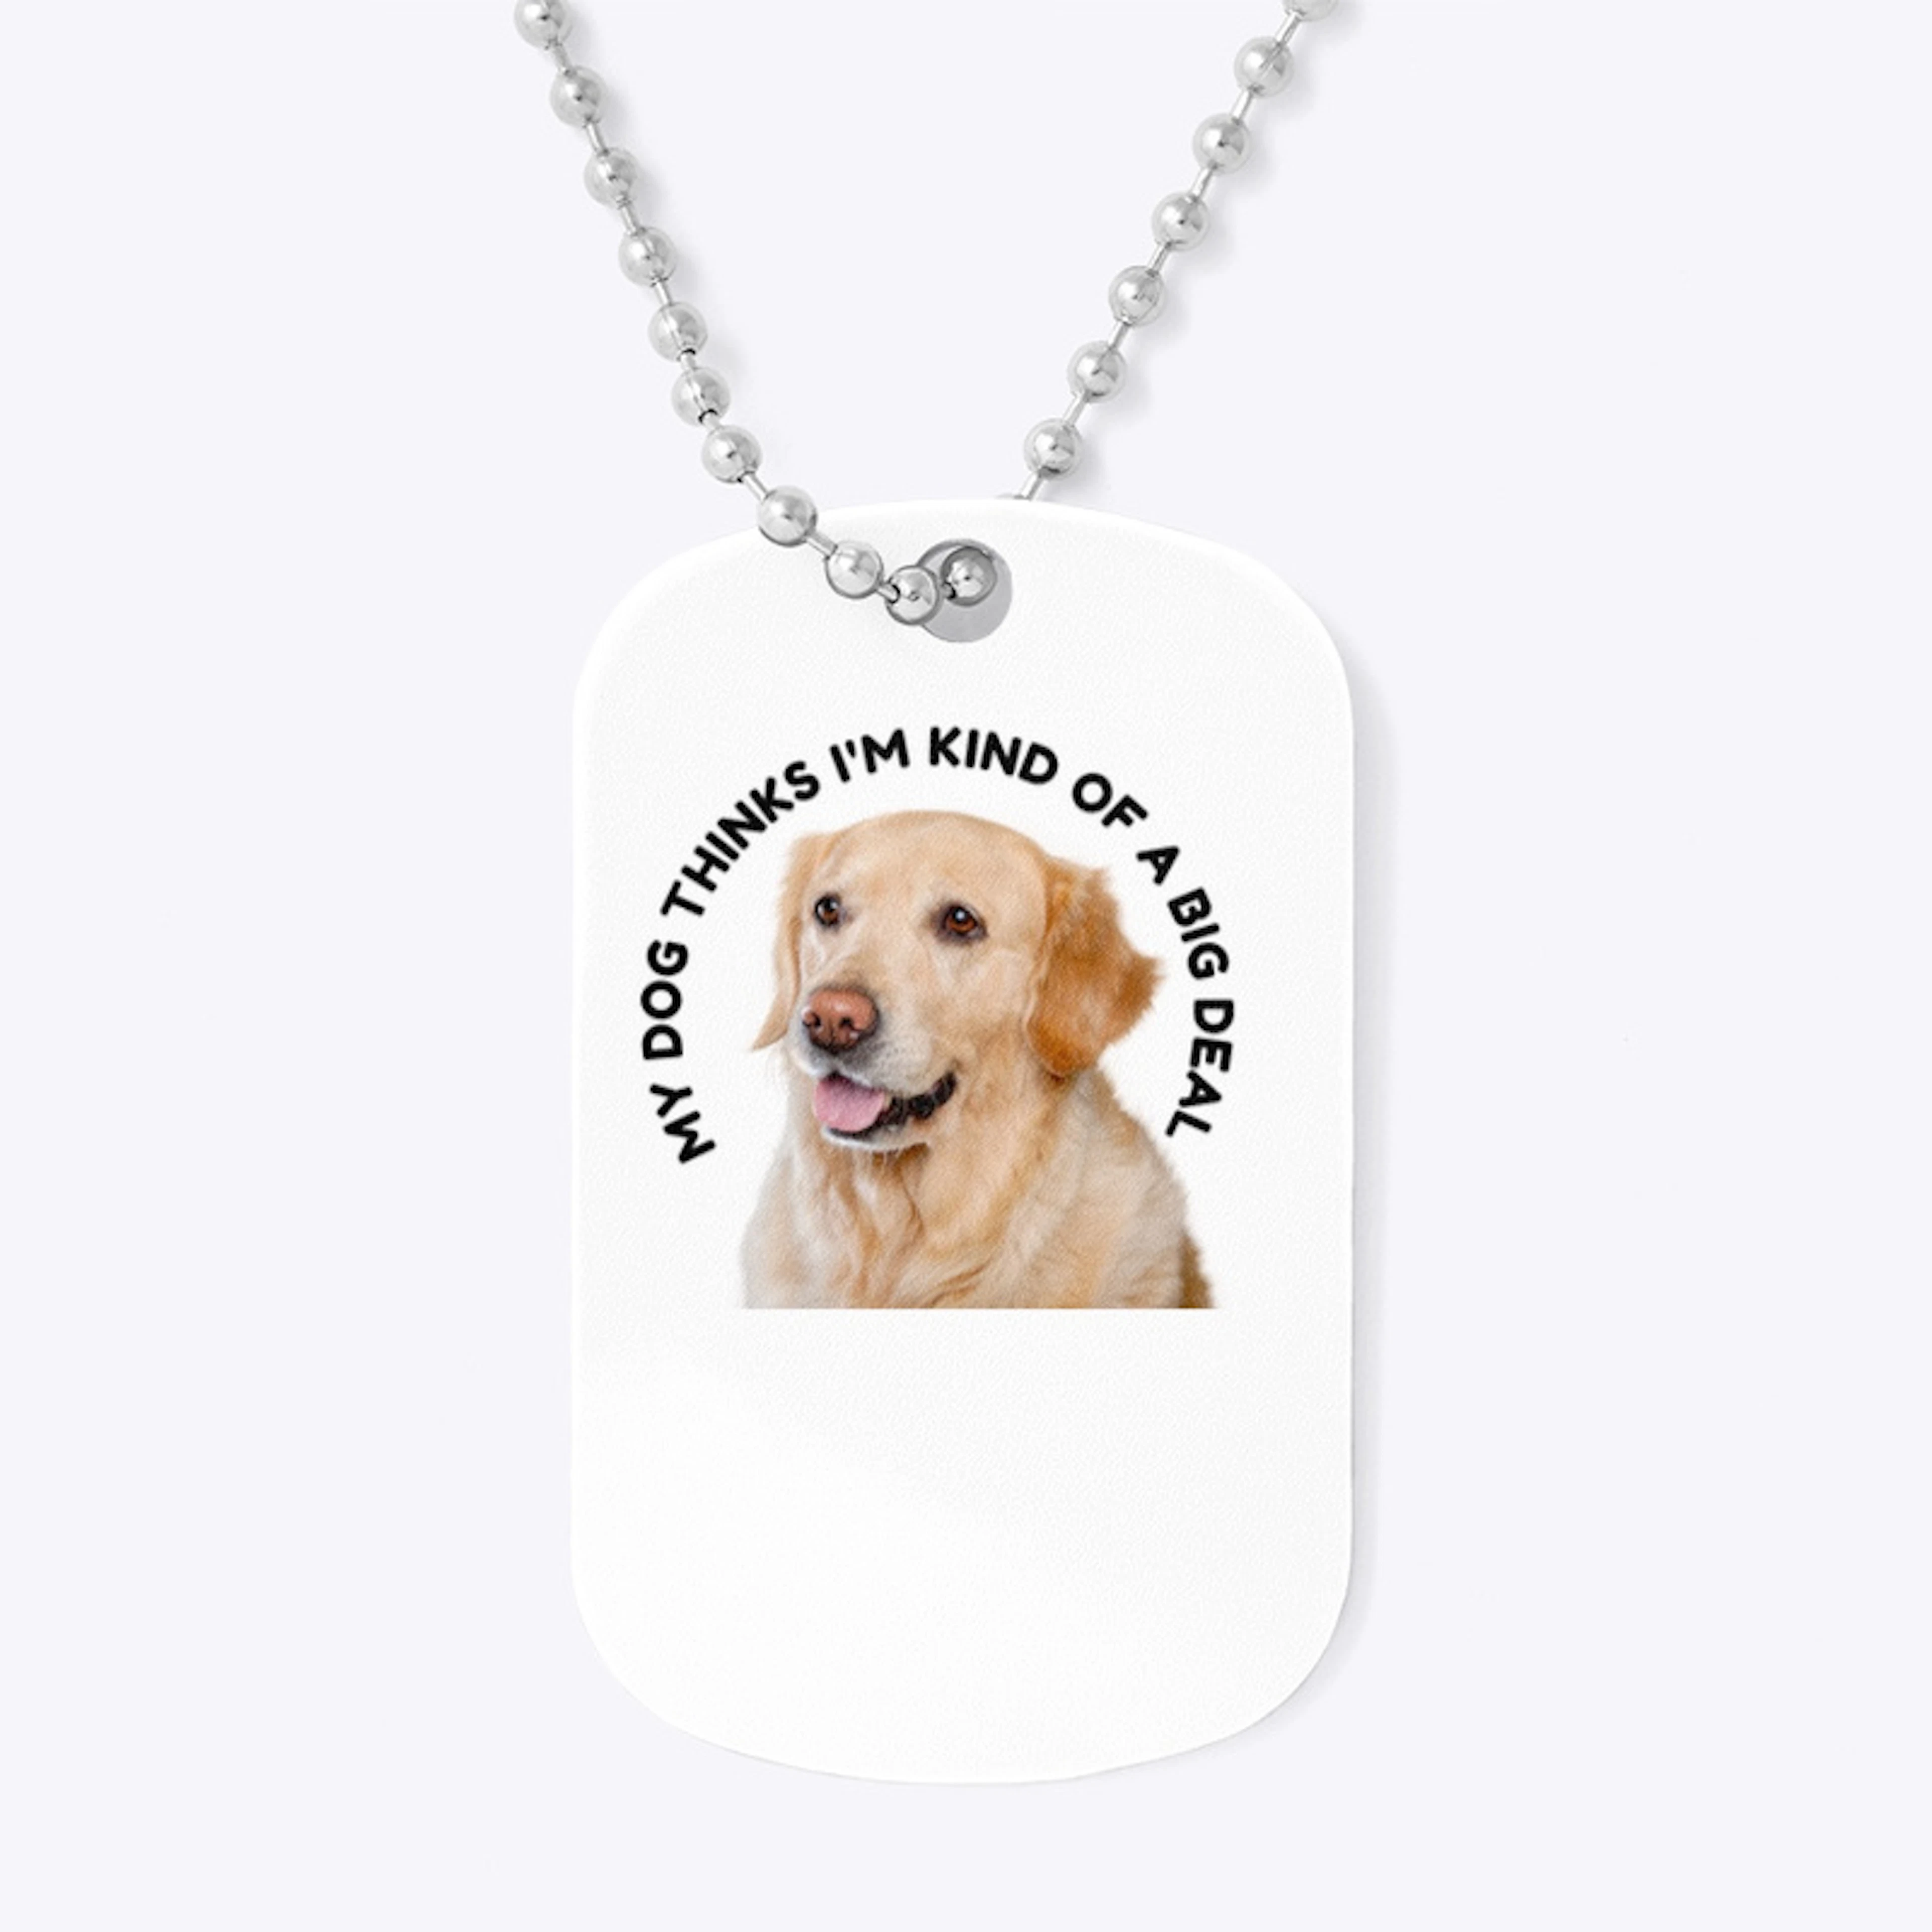 Customizable Stainless Steel Dog Tag